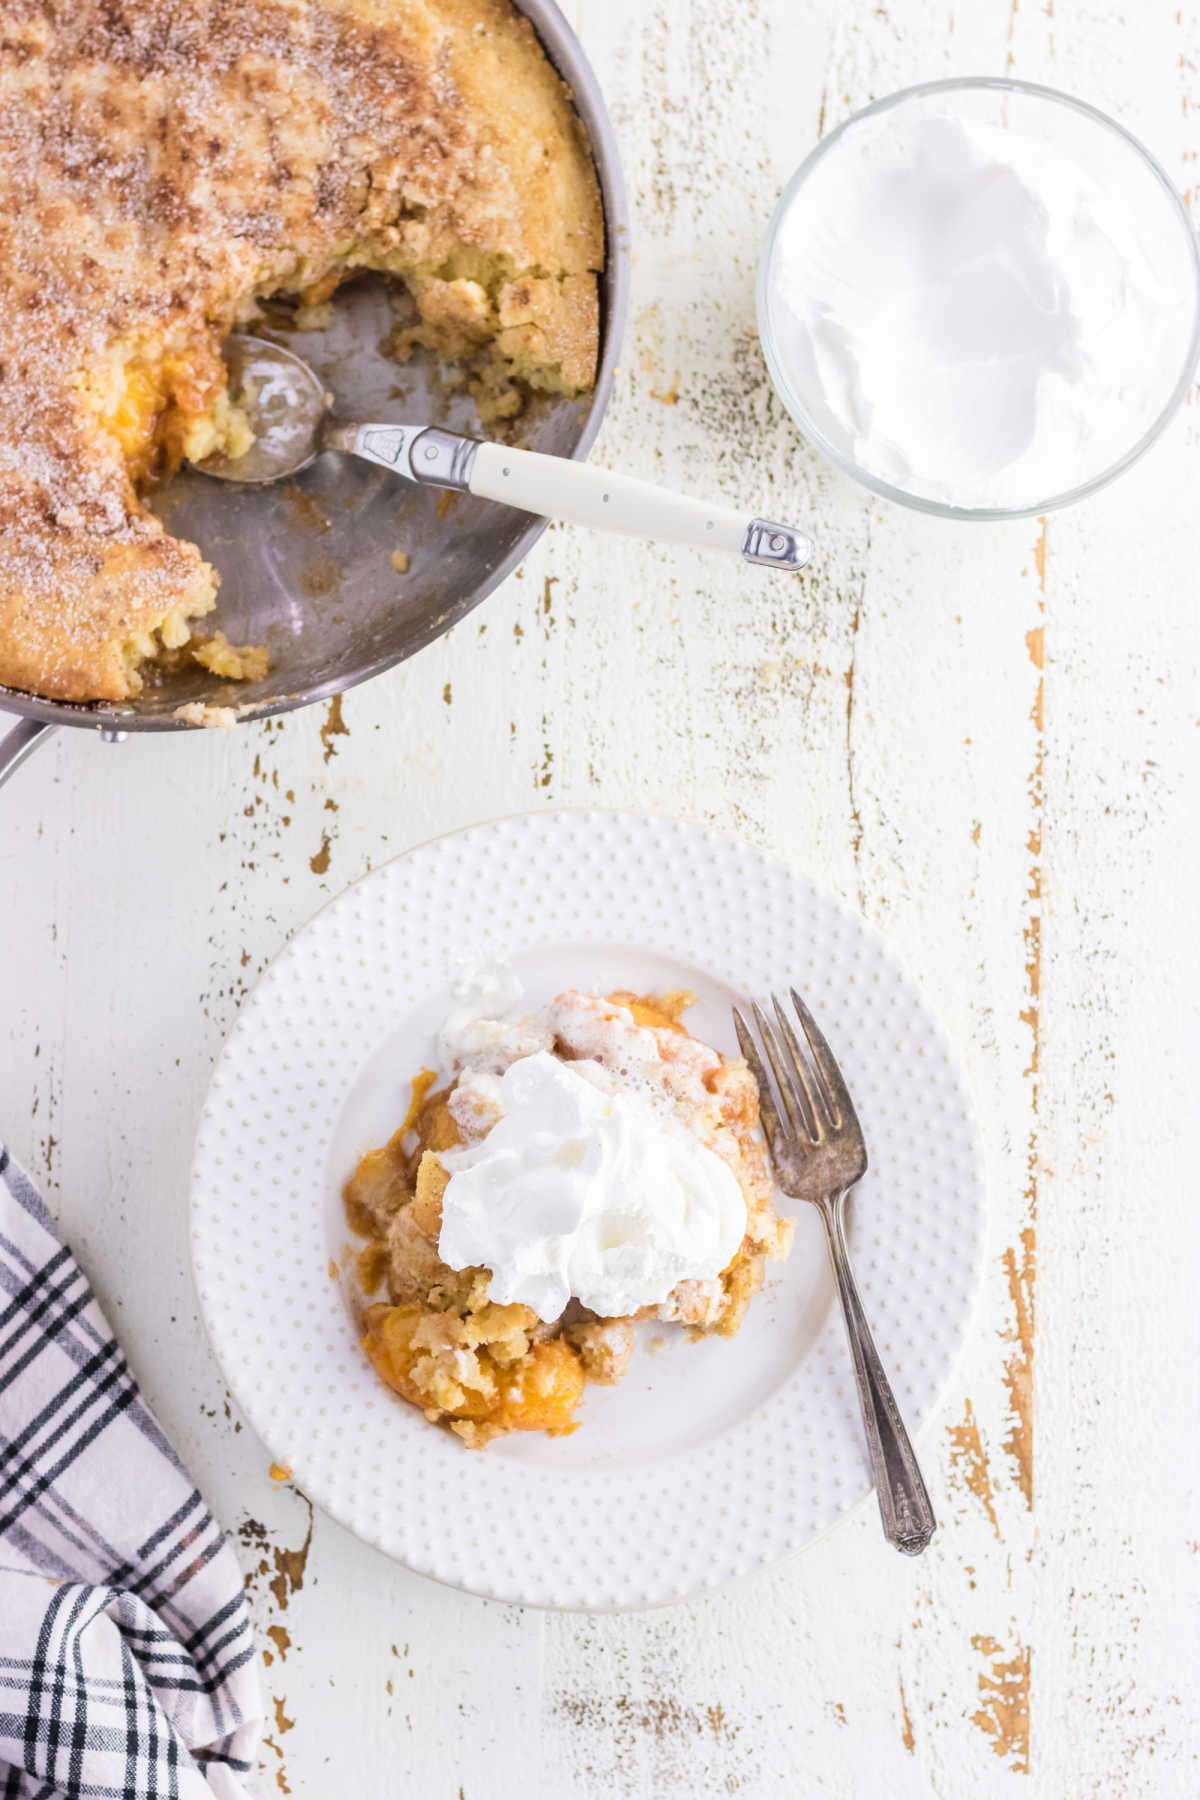 A serving of peach cobbler on a white plate with a spoonful of whipped cream on top.